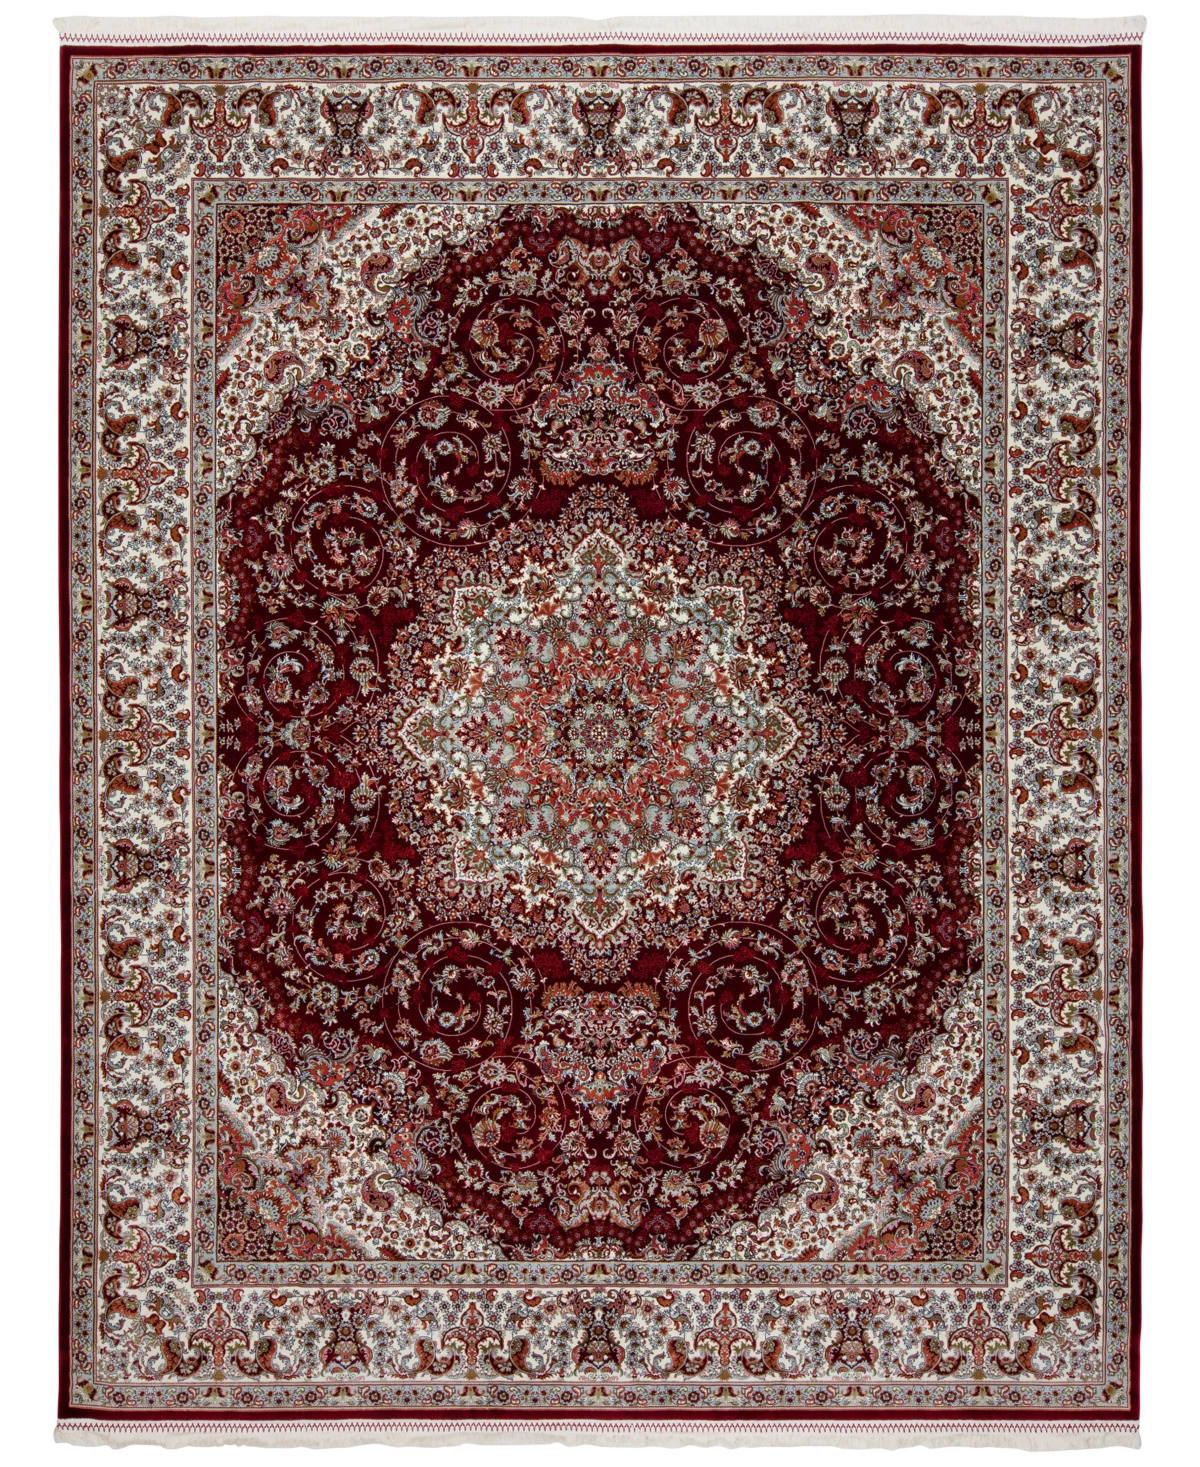 Kenneth Mink Persian Treasures Shah Area Rug, 8' X 10' In Red